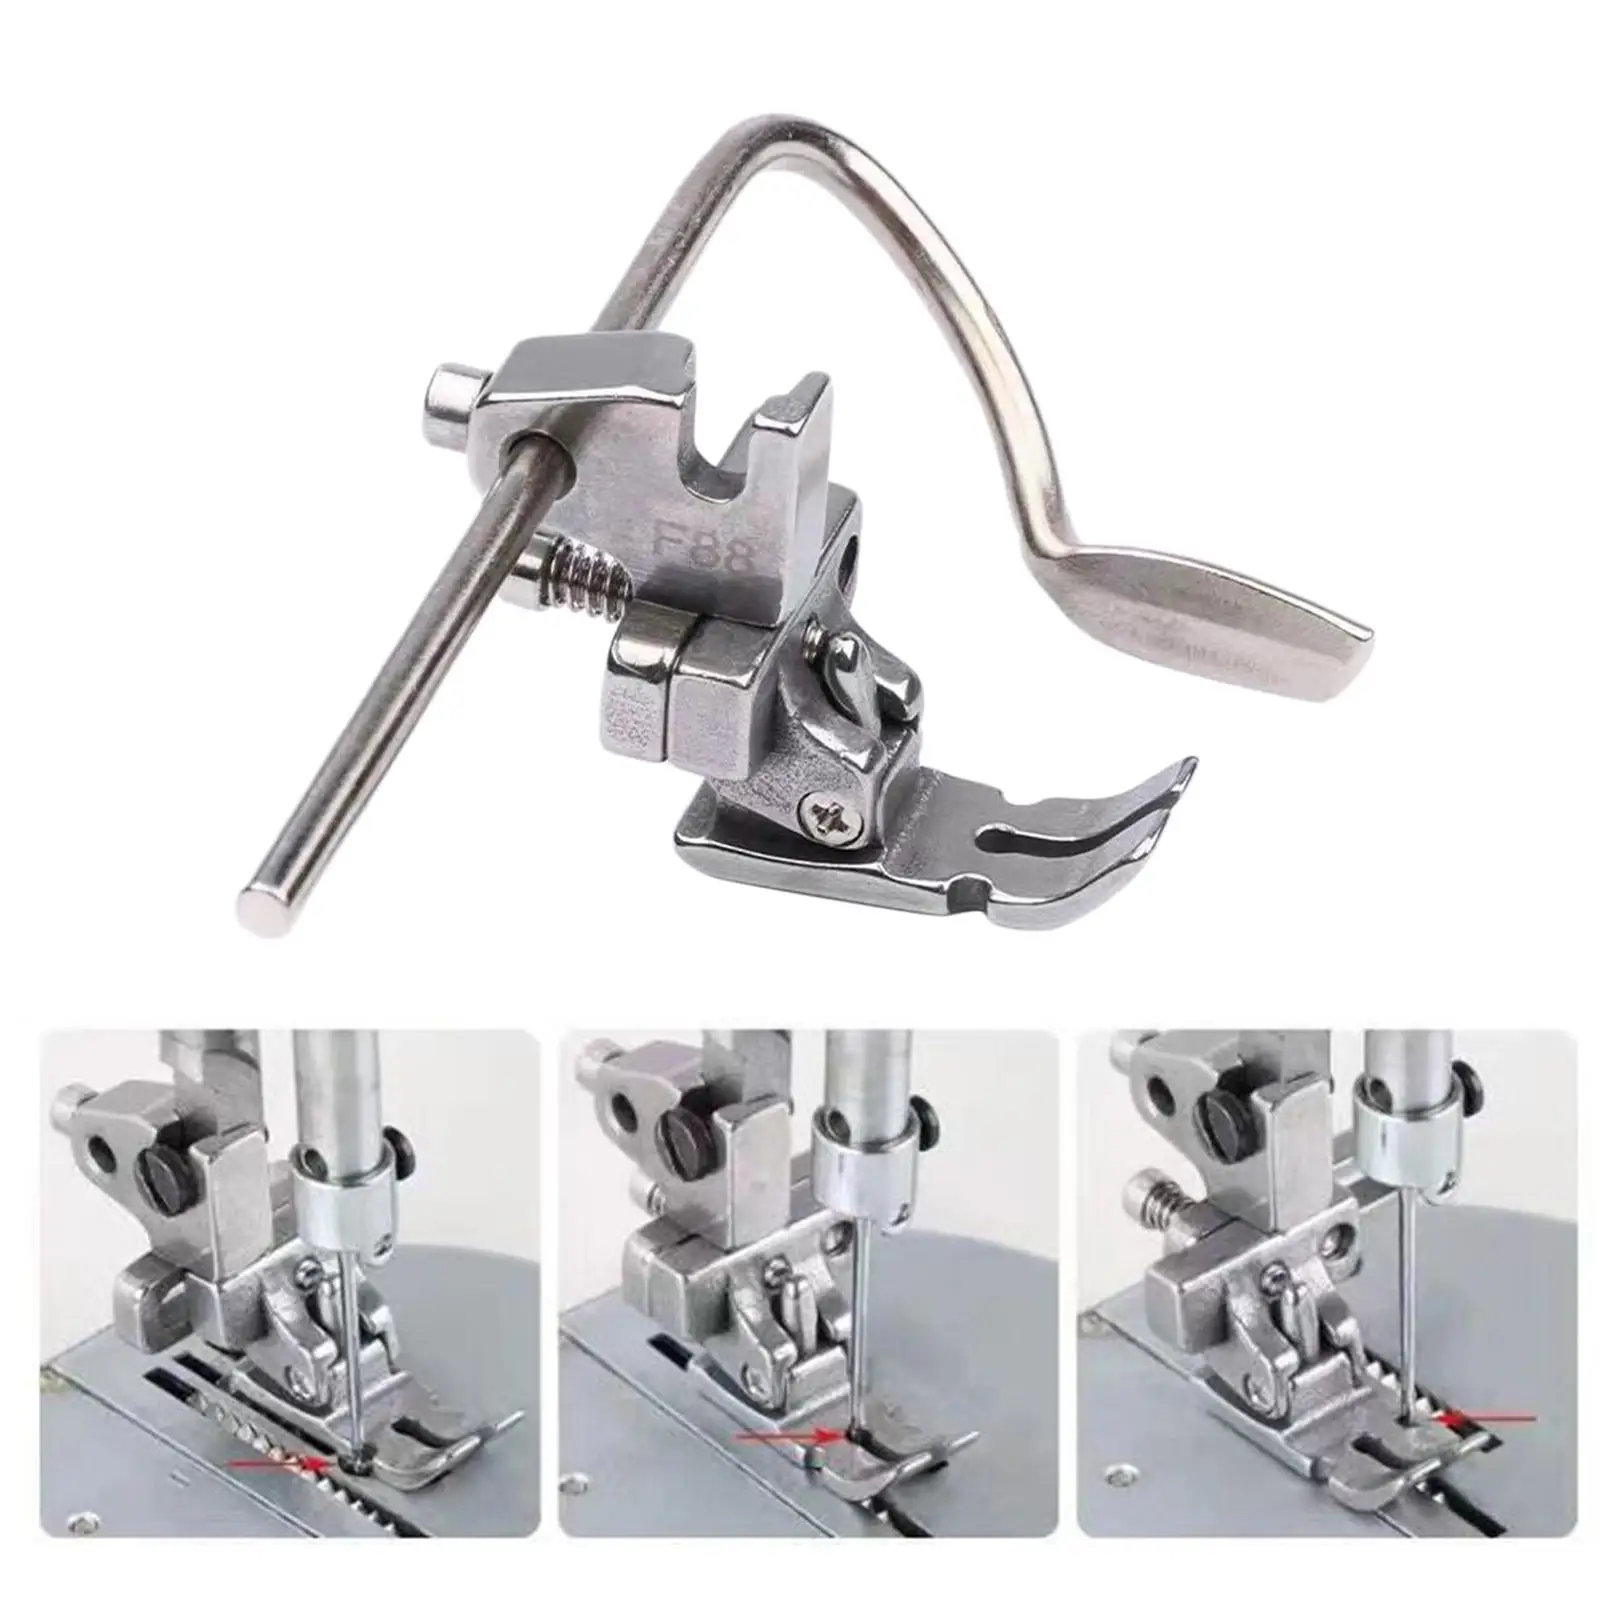 Sewing Machine Presser Foot Straight Stitch Presser Foot for Sewing Apparel DIY Arts Crafts Pillow Cover Cording Clothes